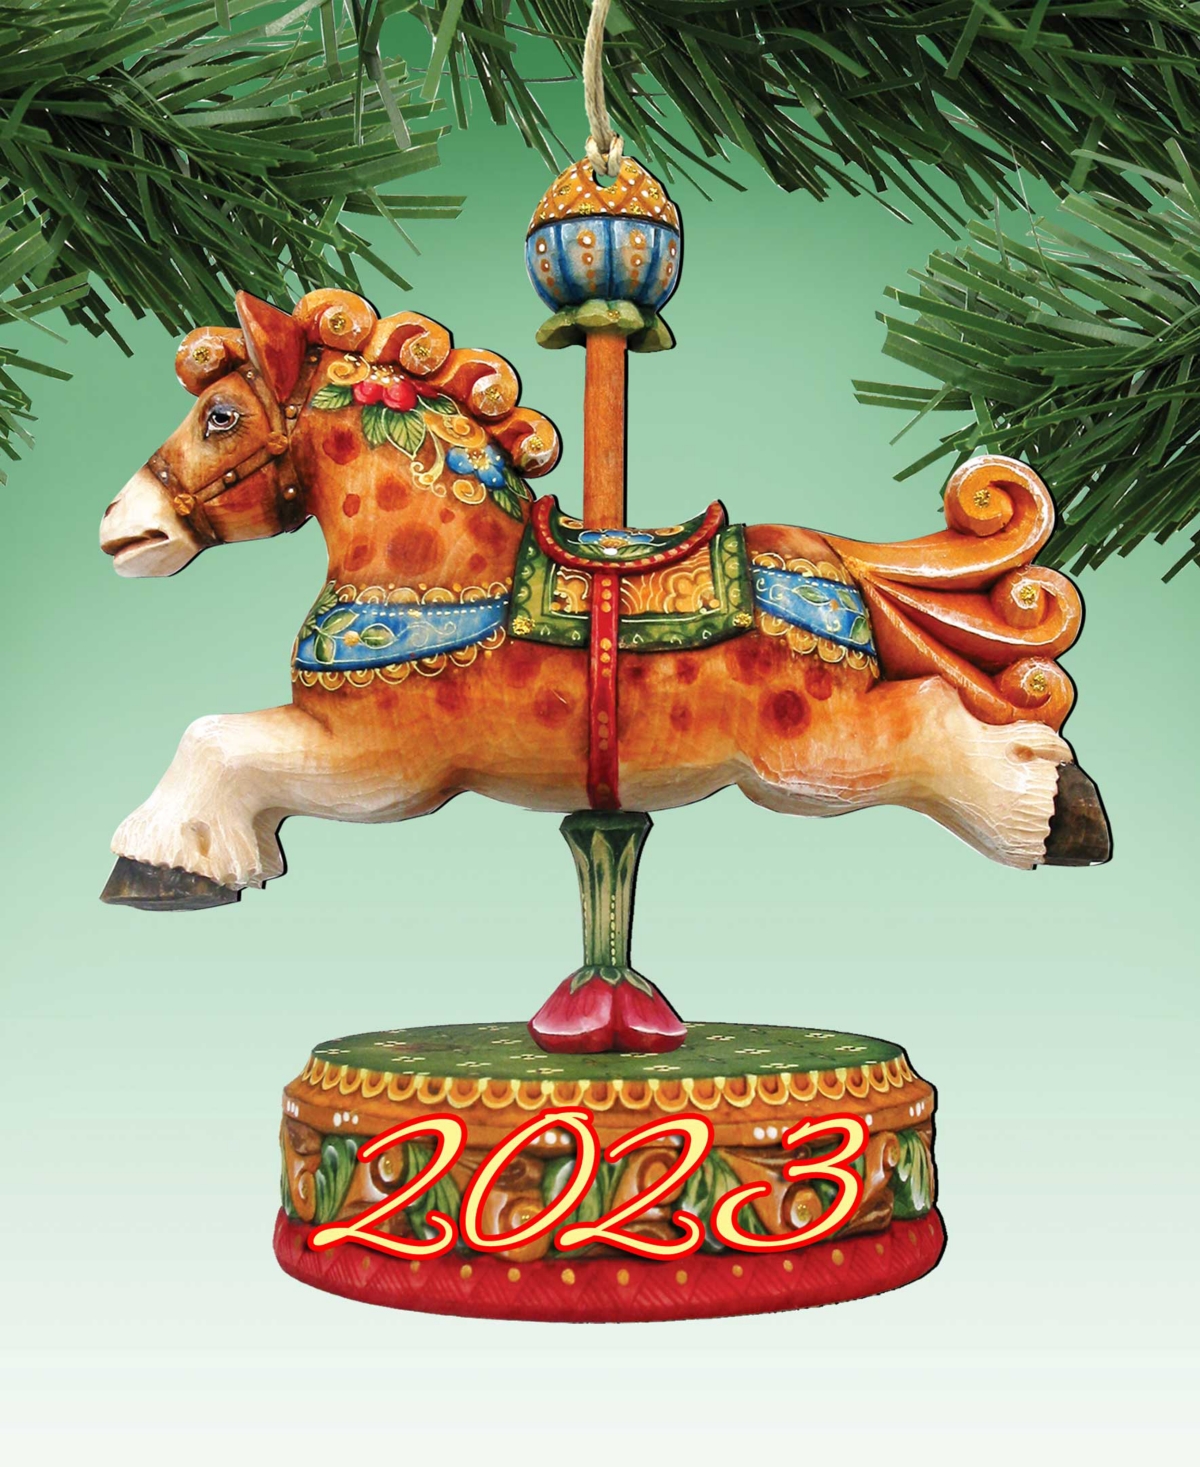 Designocracy 2023 Dated Carousel Horse Christmas Wooden Ornaments Holiday Decor Set Of 2 G. Debrekht In Multi Color